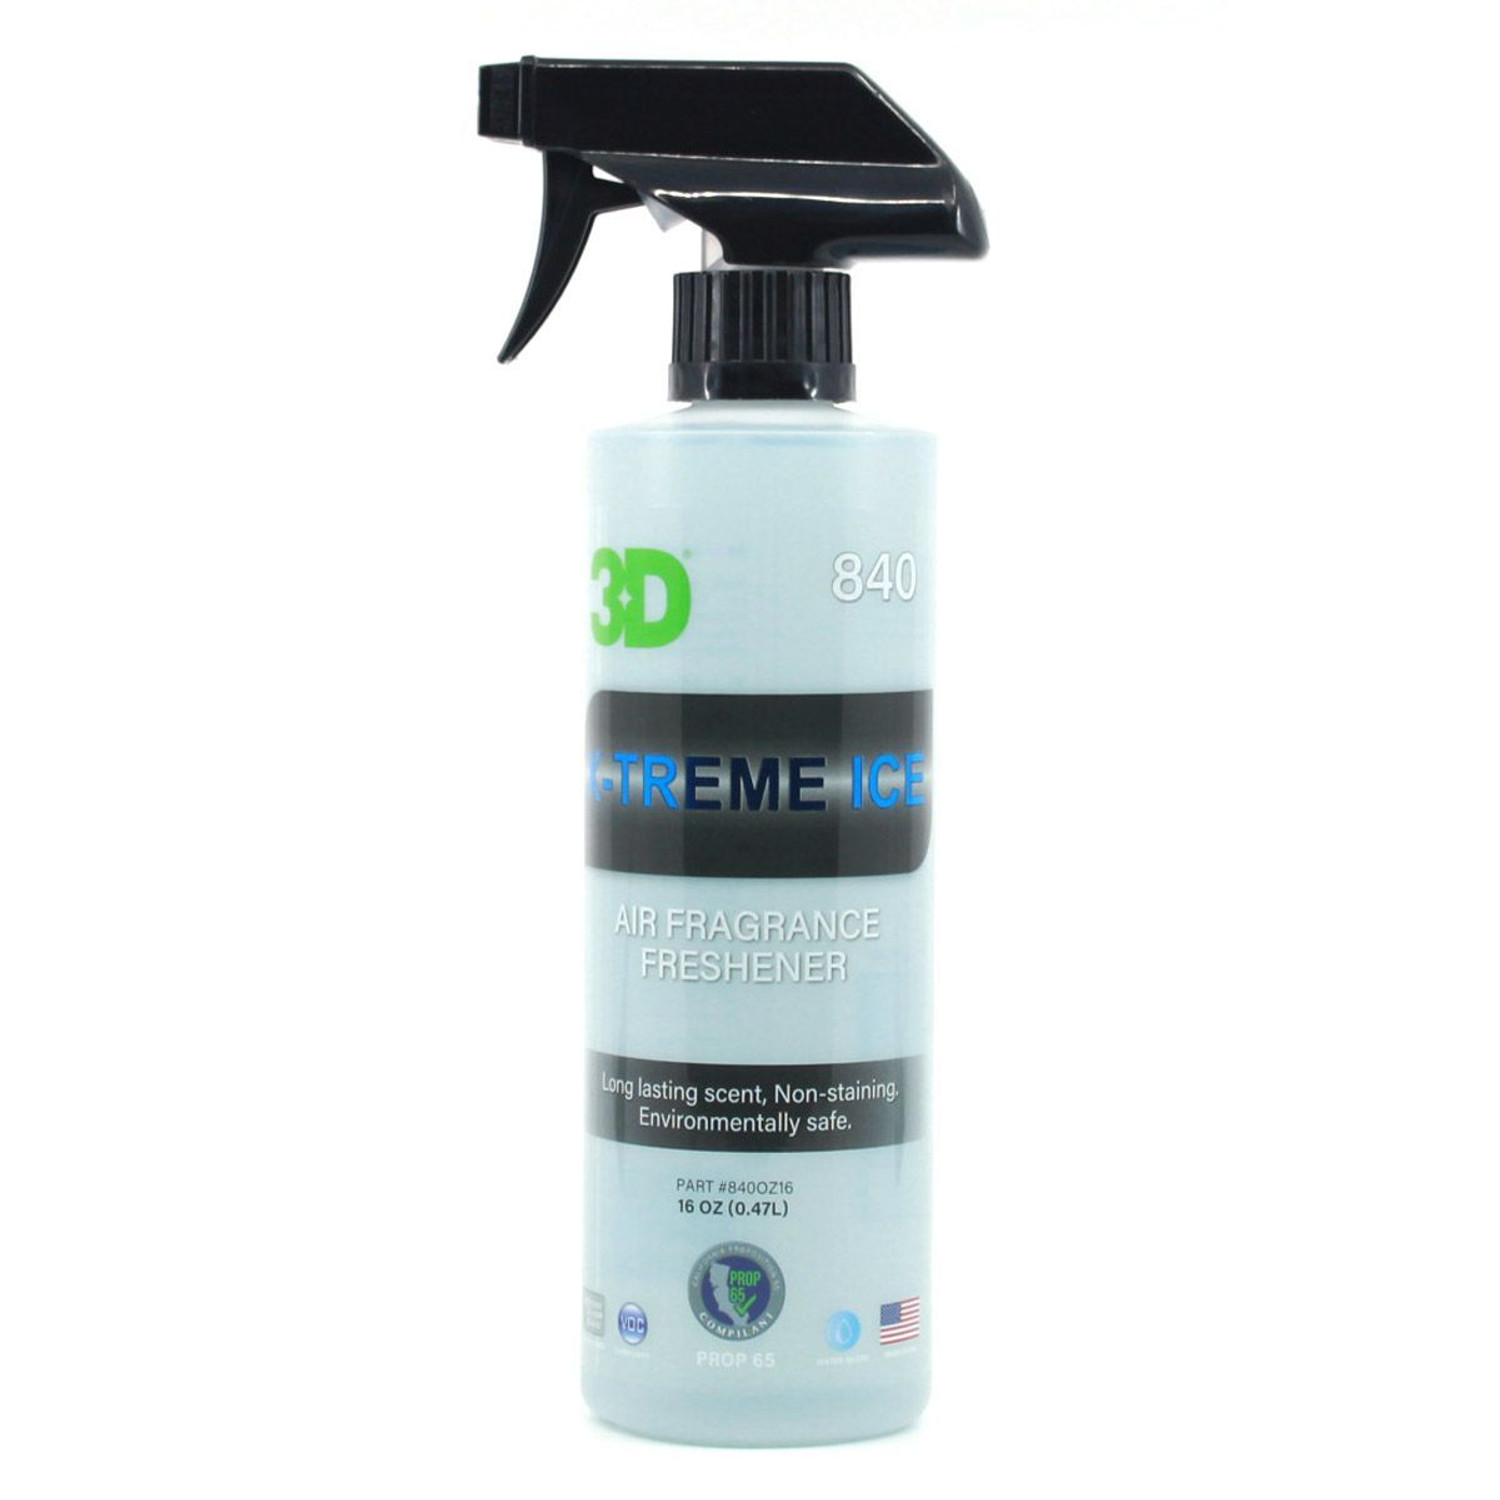  Leather Scent Car Spray (16oz) Long Lasting Air